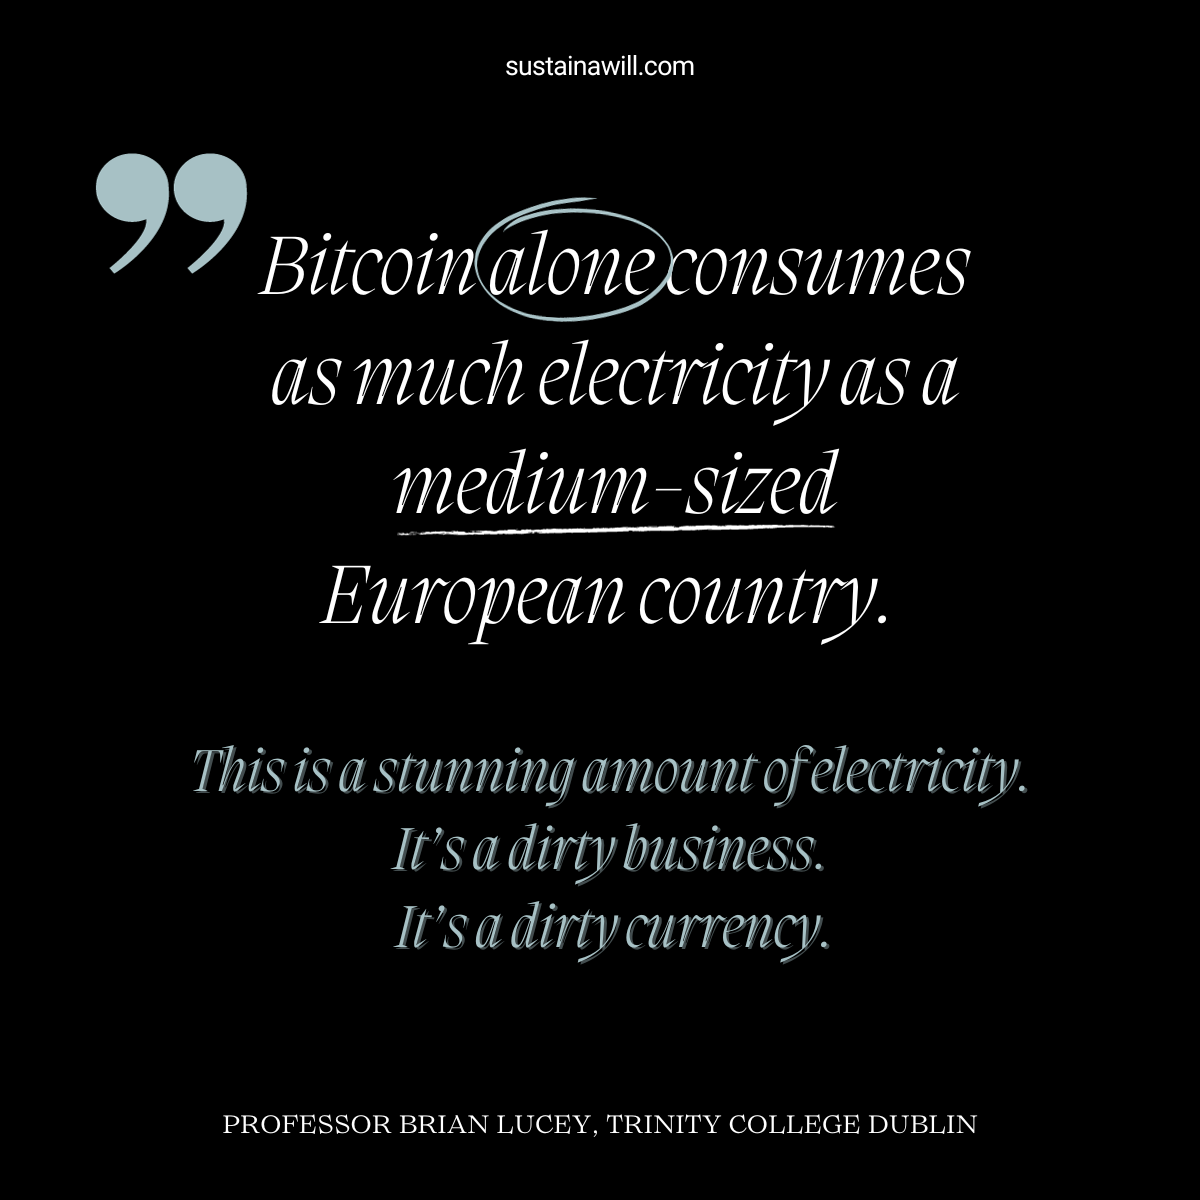 quote about crypto sustainability by Professor Brian Lucey, Trinity College Dublin